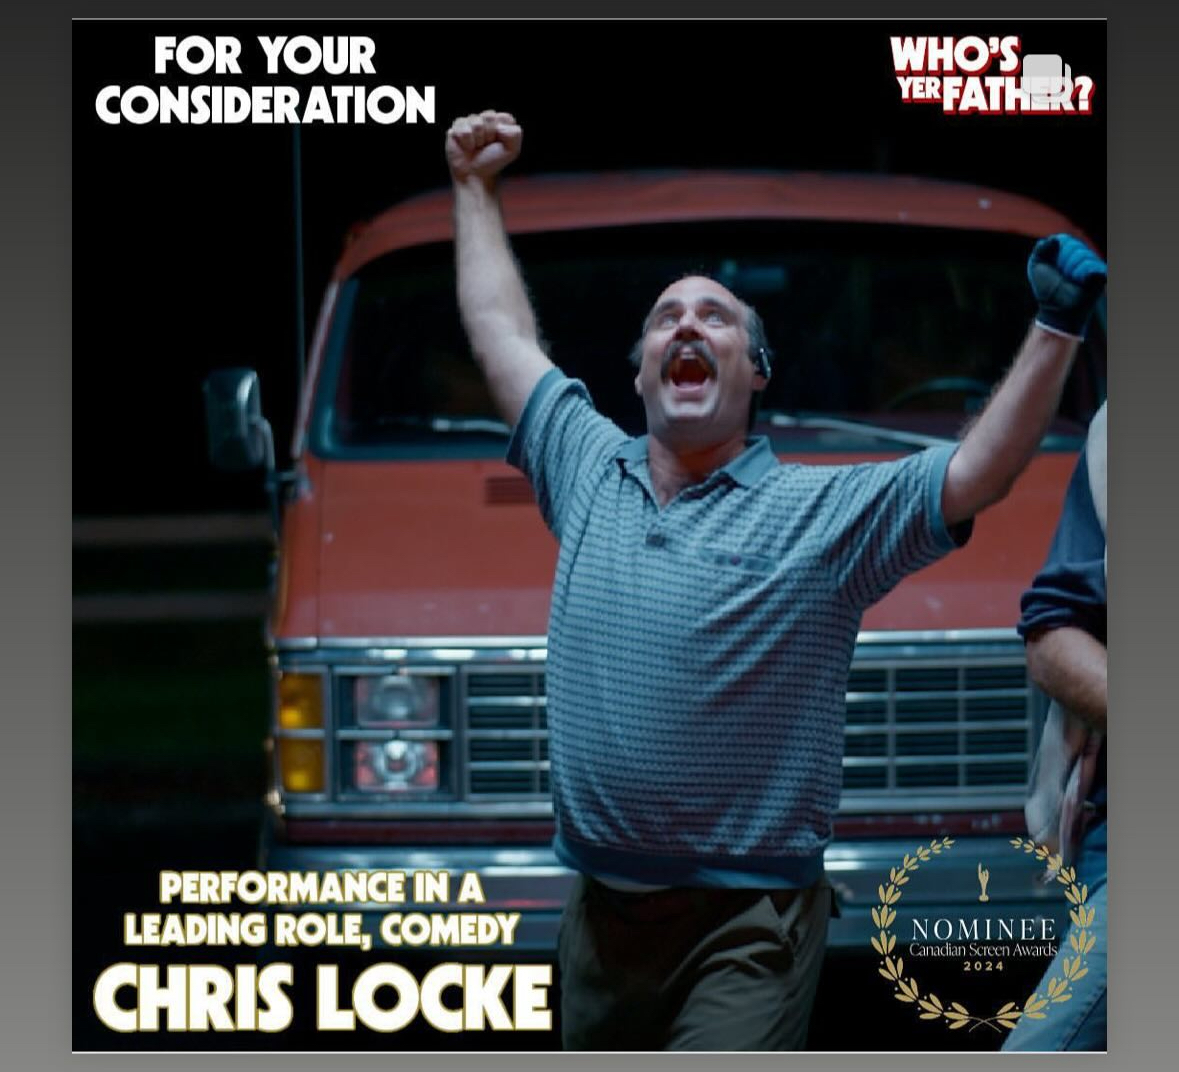 It's the final week of voting for the @TheCdnAcademy Awards. Please consider @chrislockeworld for Performance in a Leading Role (Film Comedy) in @whosyerfather!